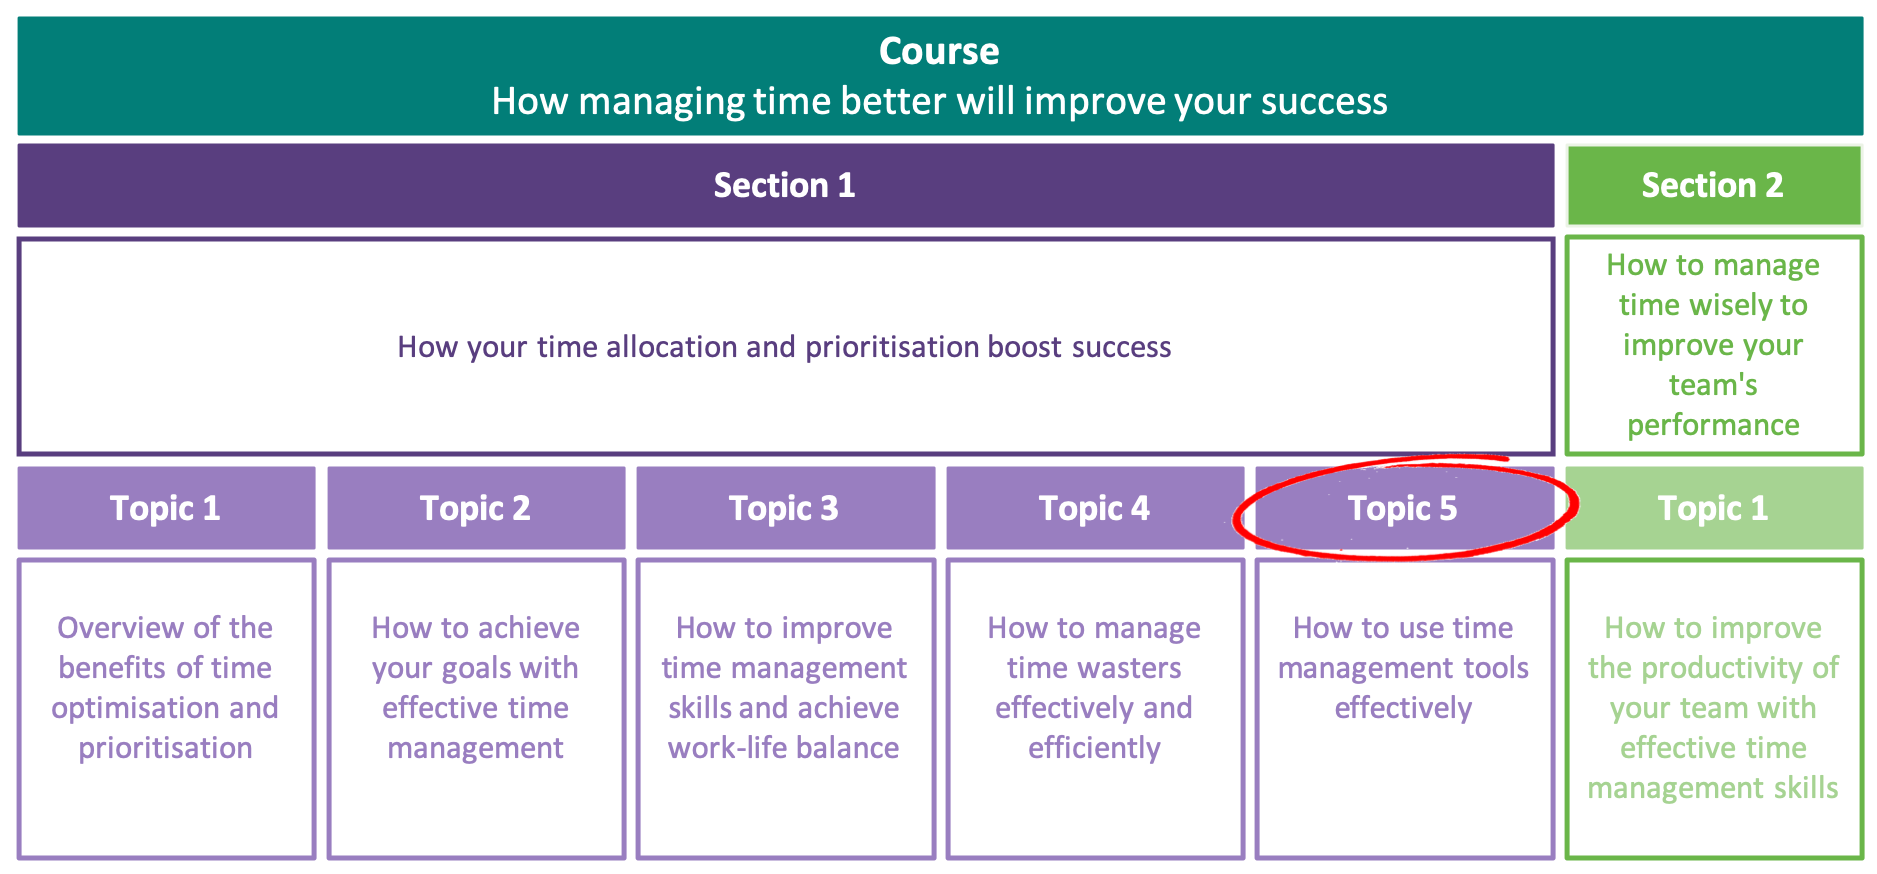 How to use time management tools effectively